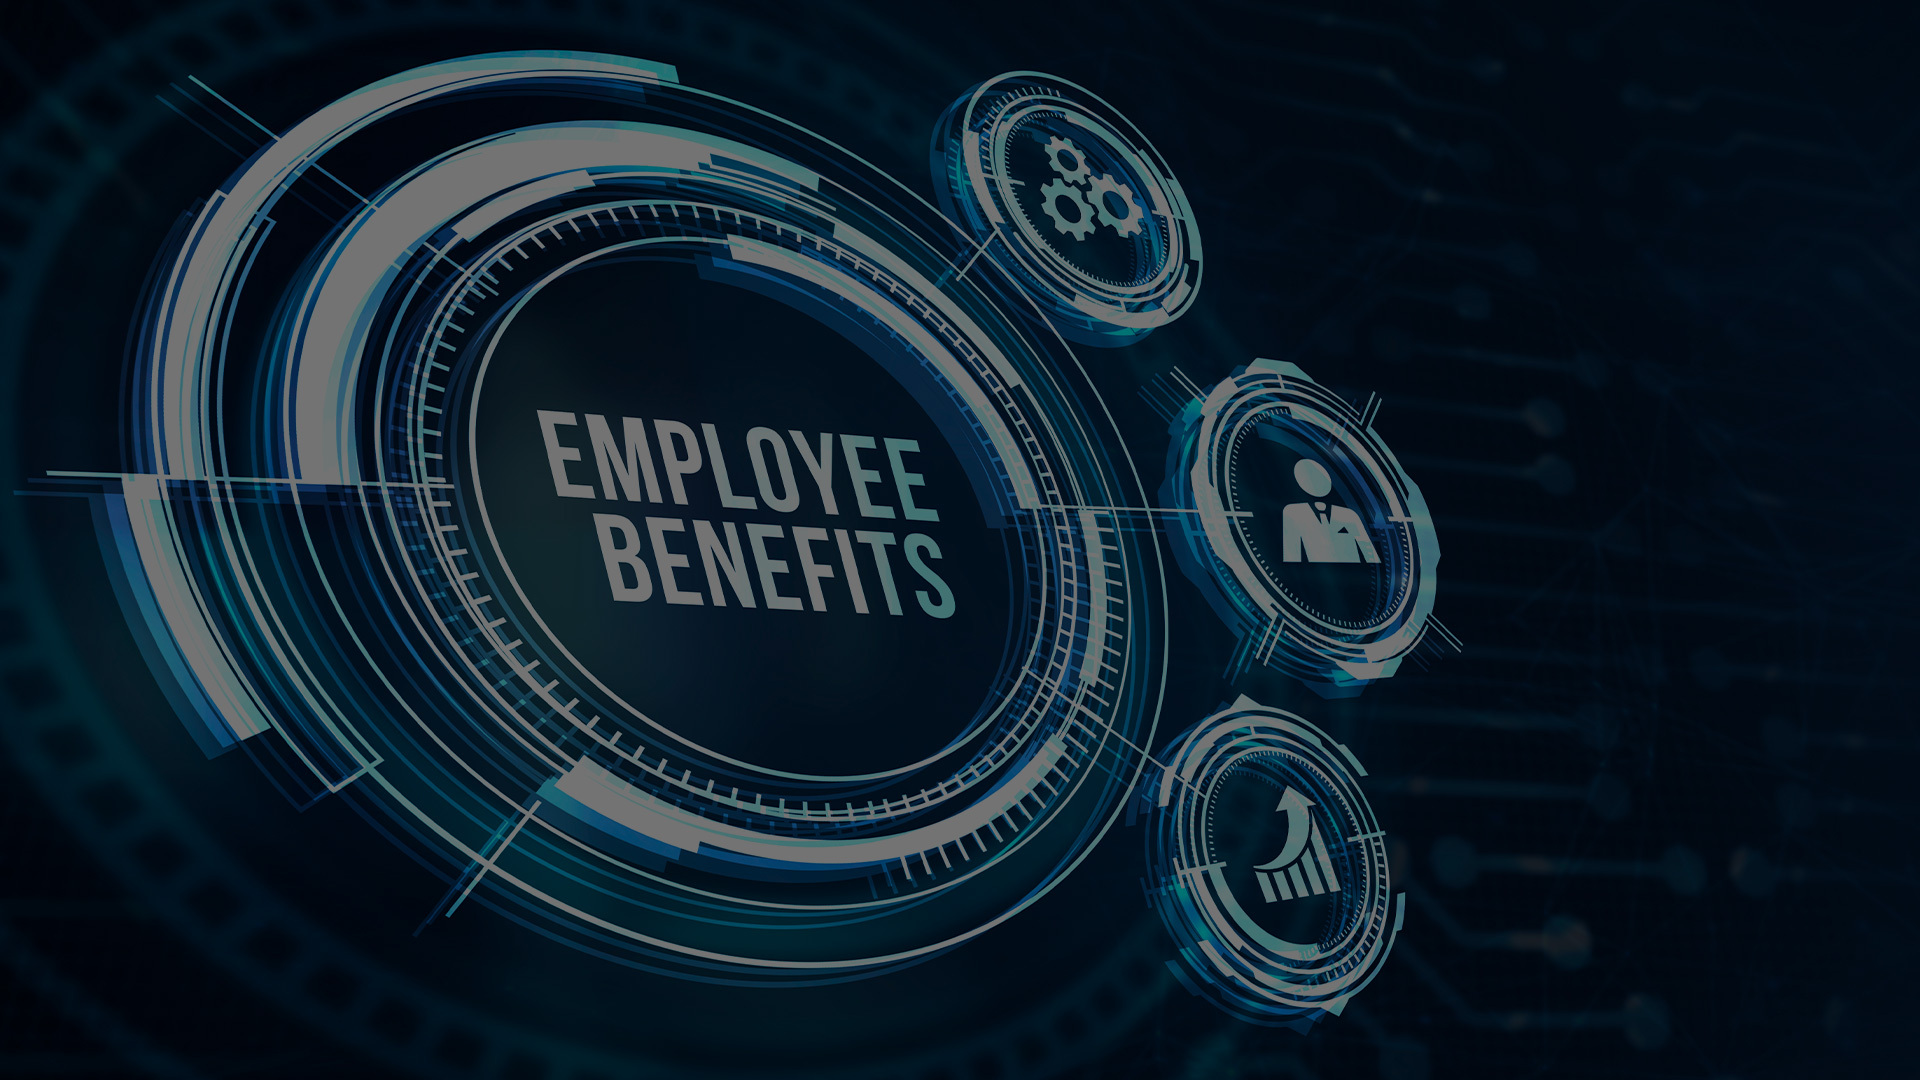 Screen with the words "Employee Benefits" on it and blue and white streaks circling it